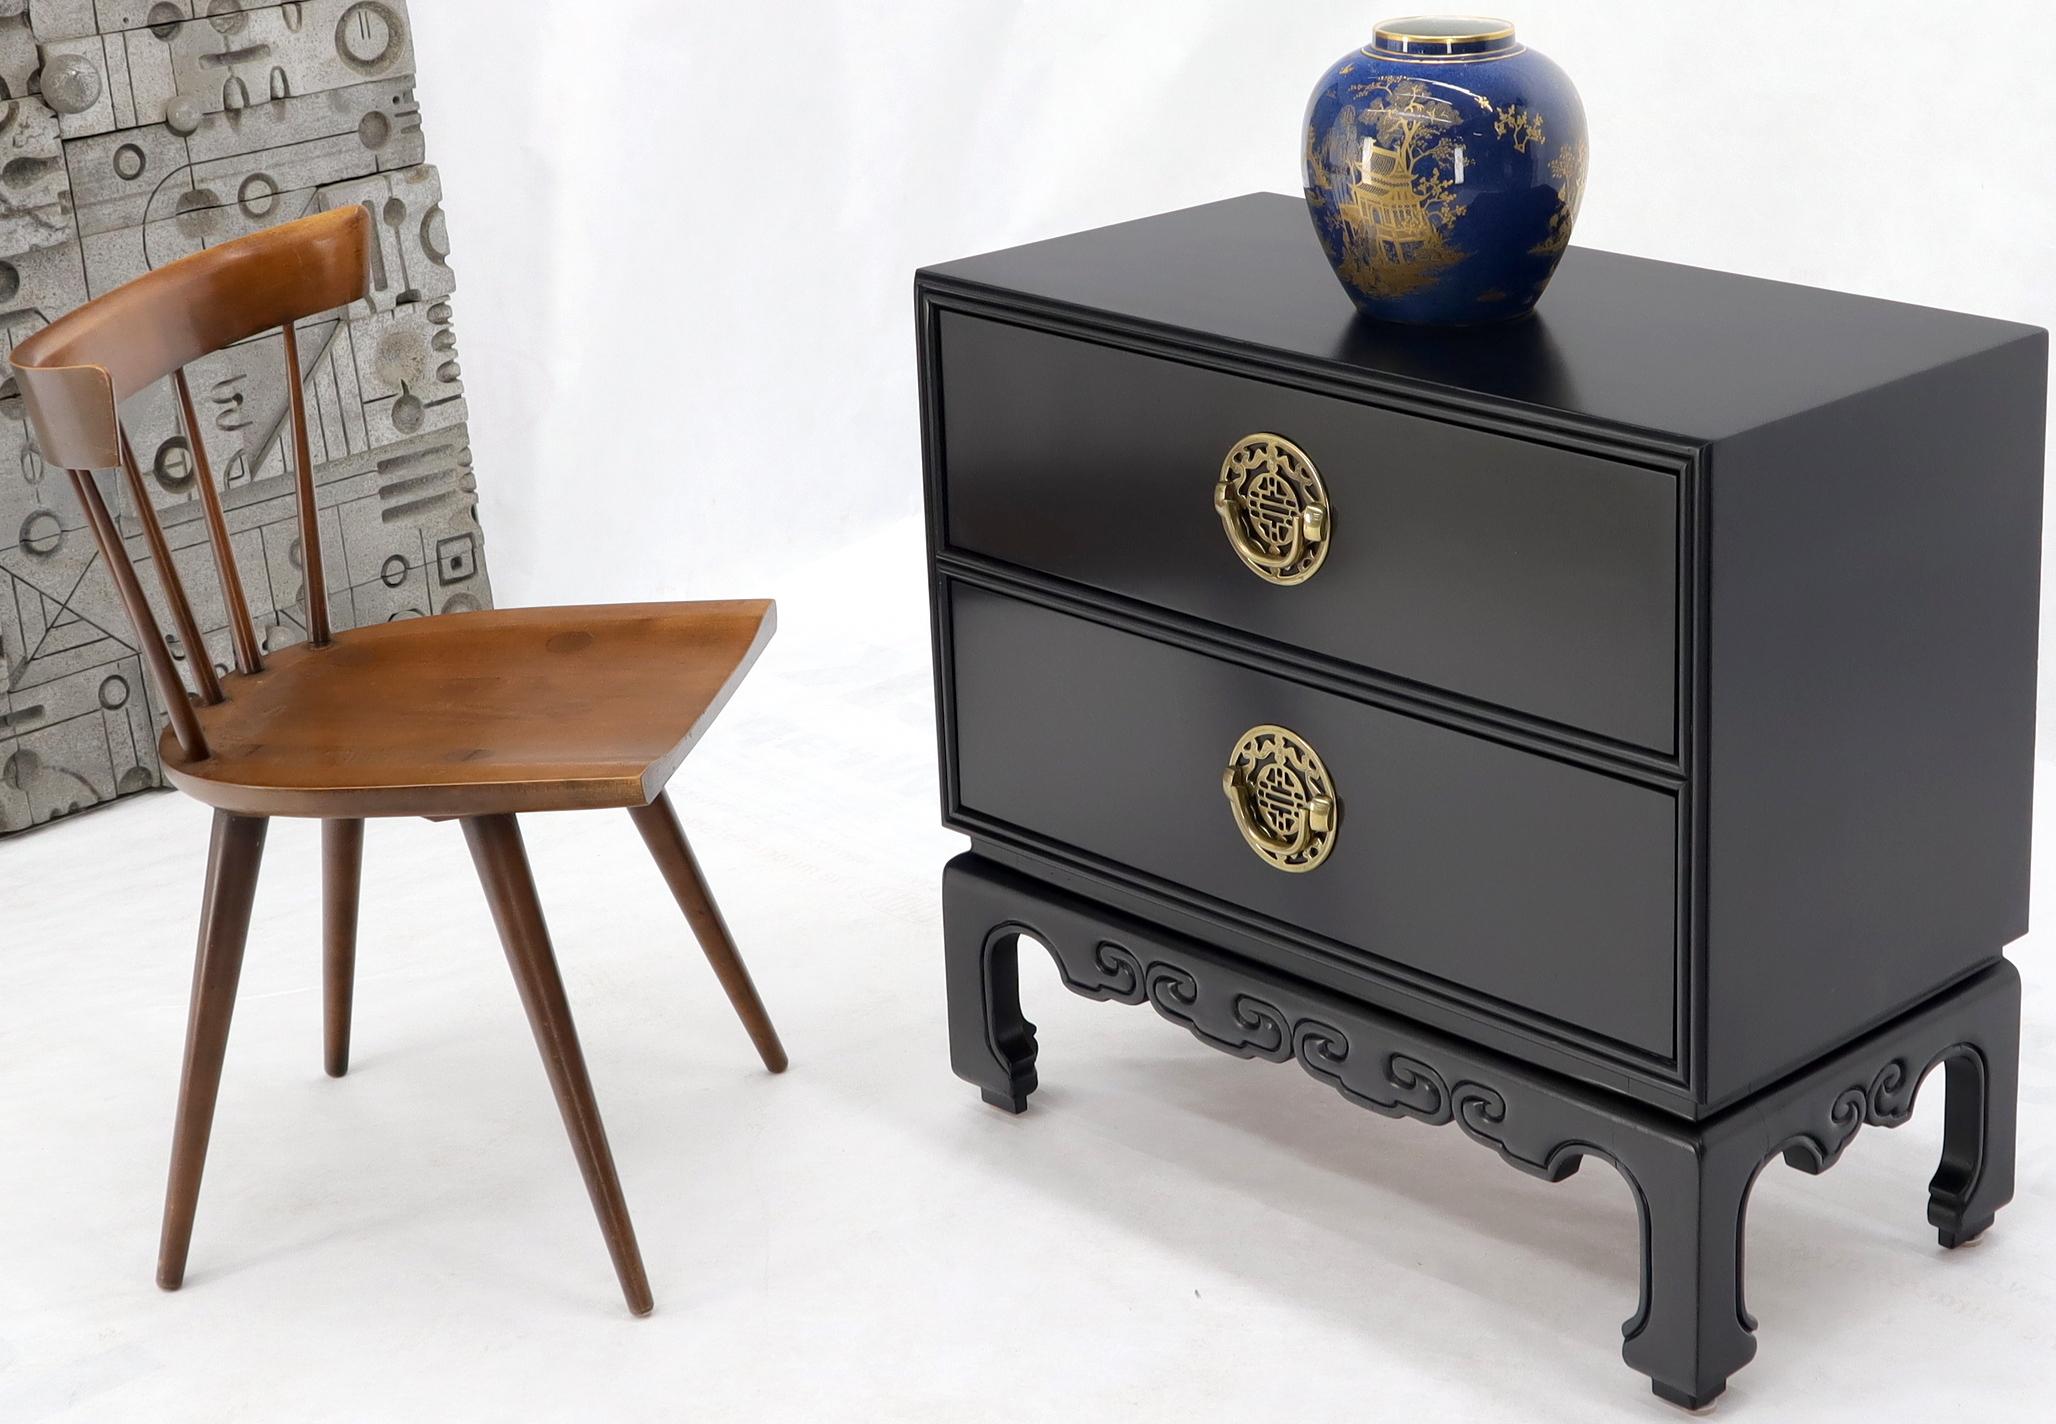 Pair of Mid-Century Modern high quality craftsmanship Asian influence two drawers side or end tables on bracket leg by Hekman.